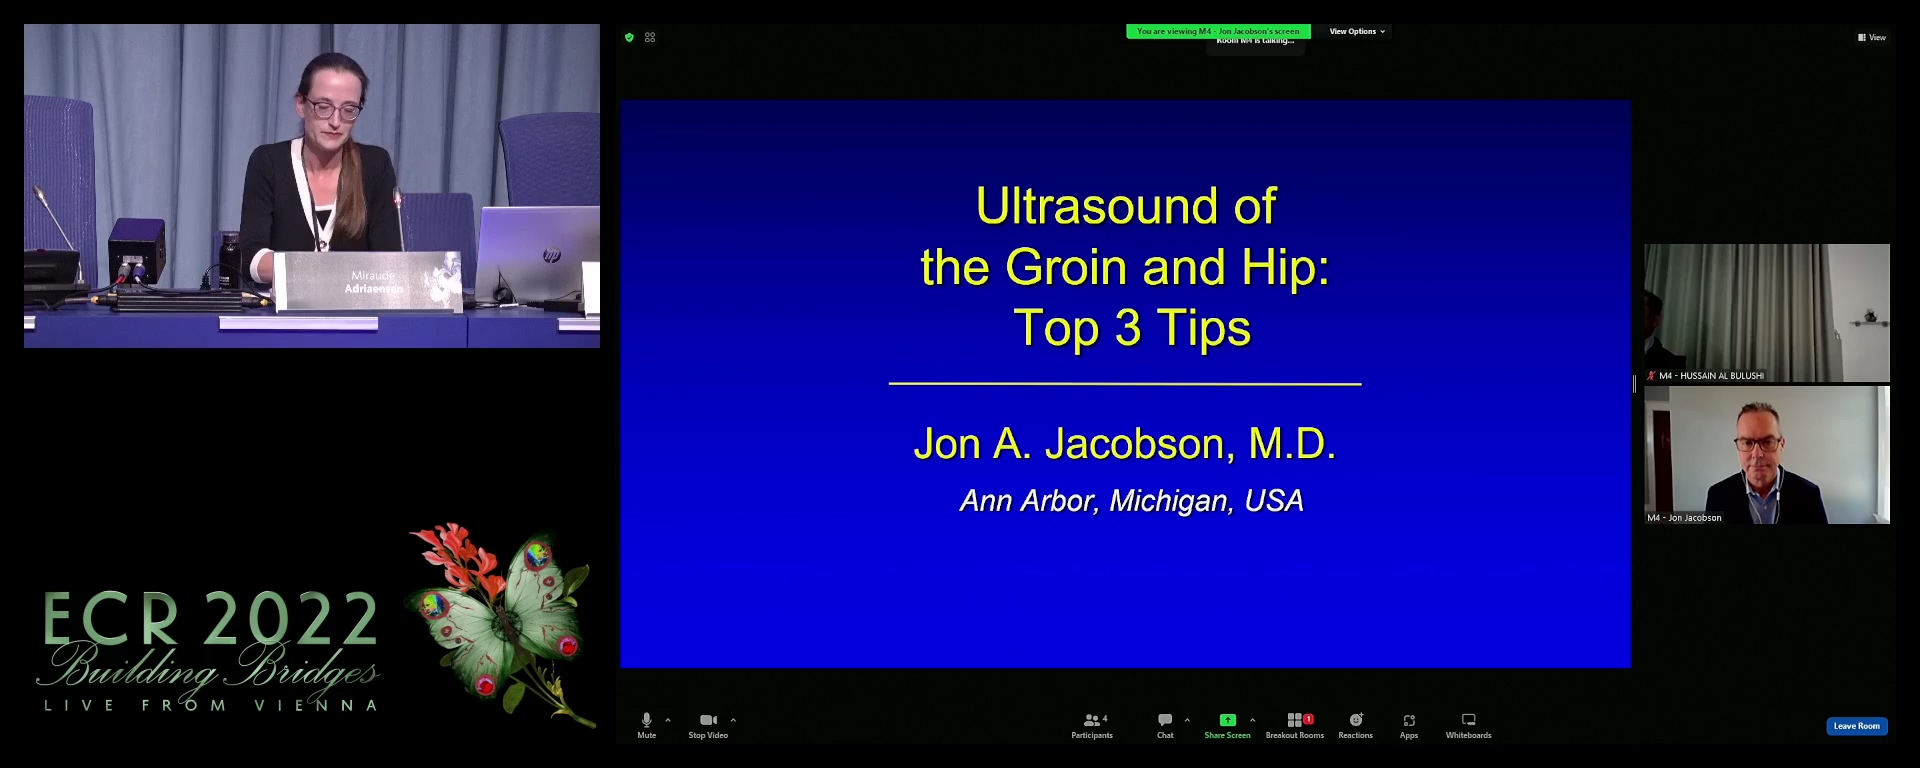 My top three tips for ultrasound of the groin and hip - Jon Jacobson, Cincinnati, OH / US